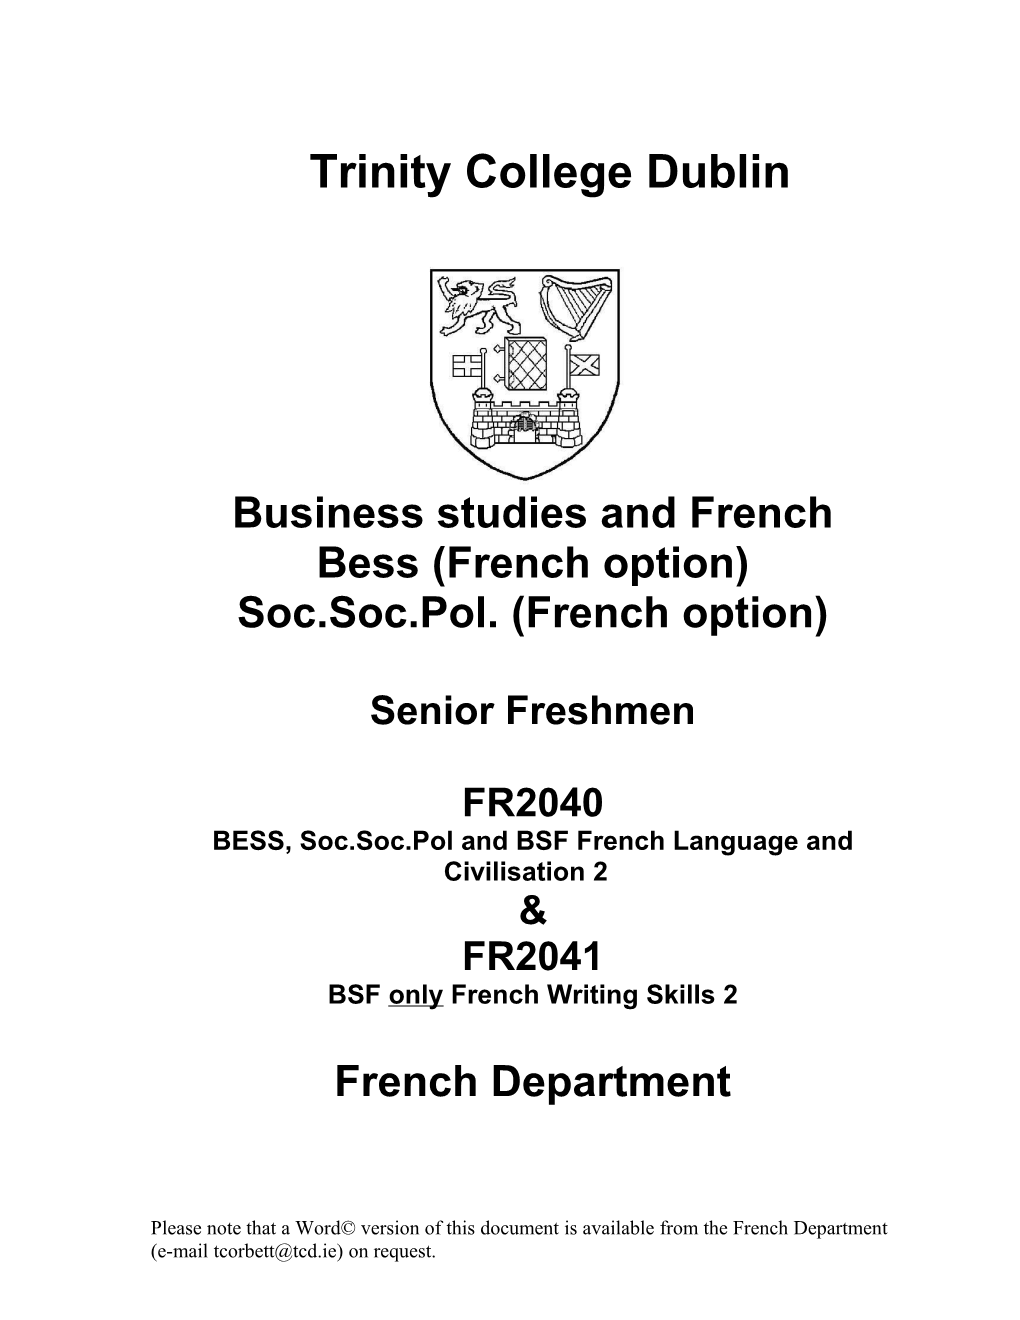 Business Studies and French